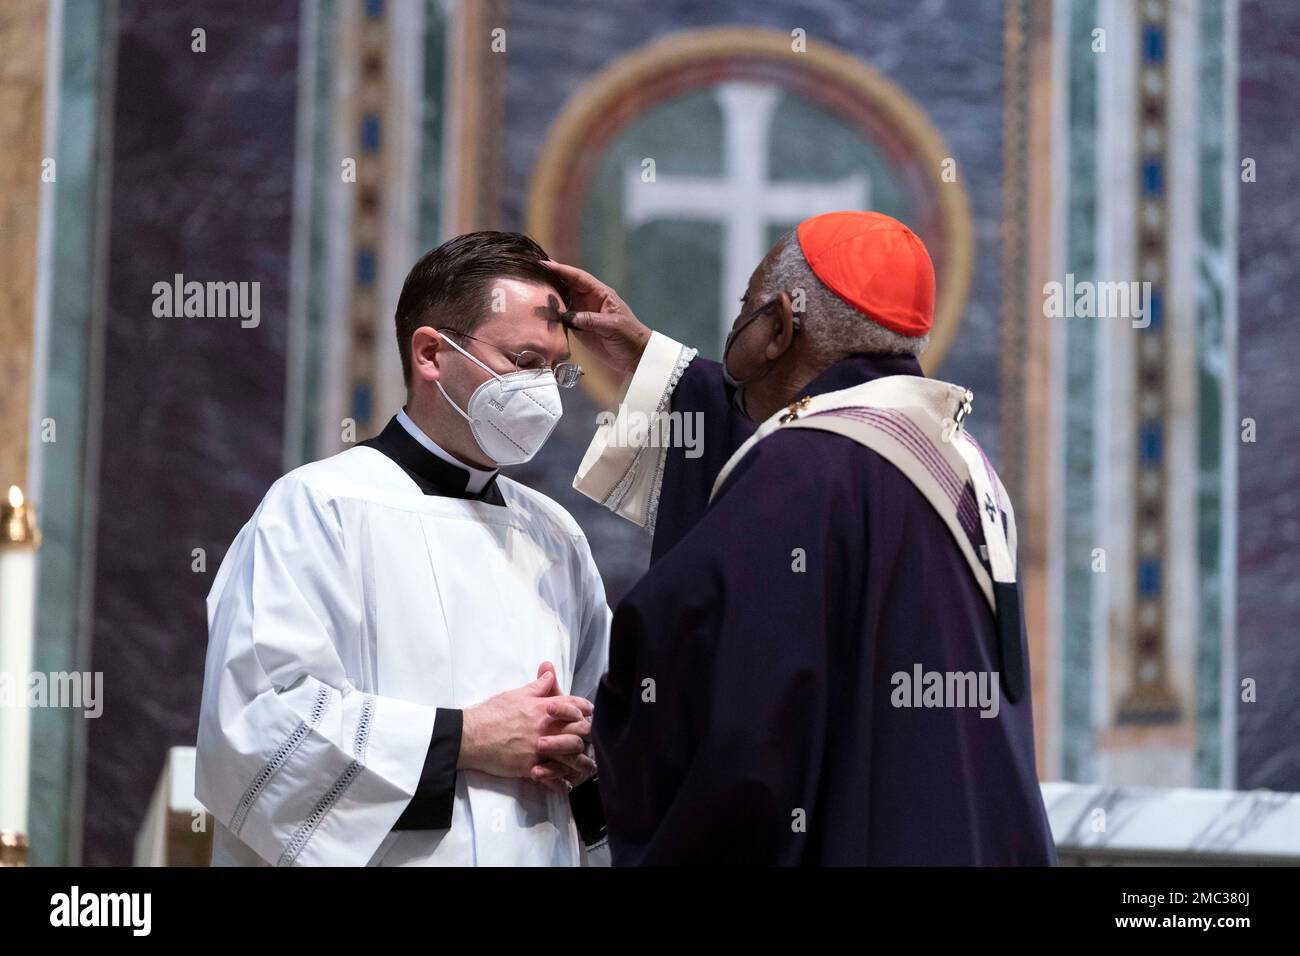 Cardinal Wilton Gregory, Archbishop of Washington places ashes on the  forehead of parishioners duringthe Ash Wednesday mass which marks the  beginning of Lent at Saint Matthew the Apostle Cathedral in Washington,  Wednesday